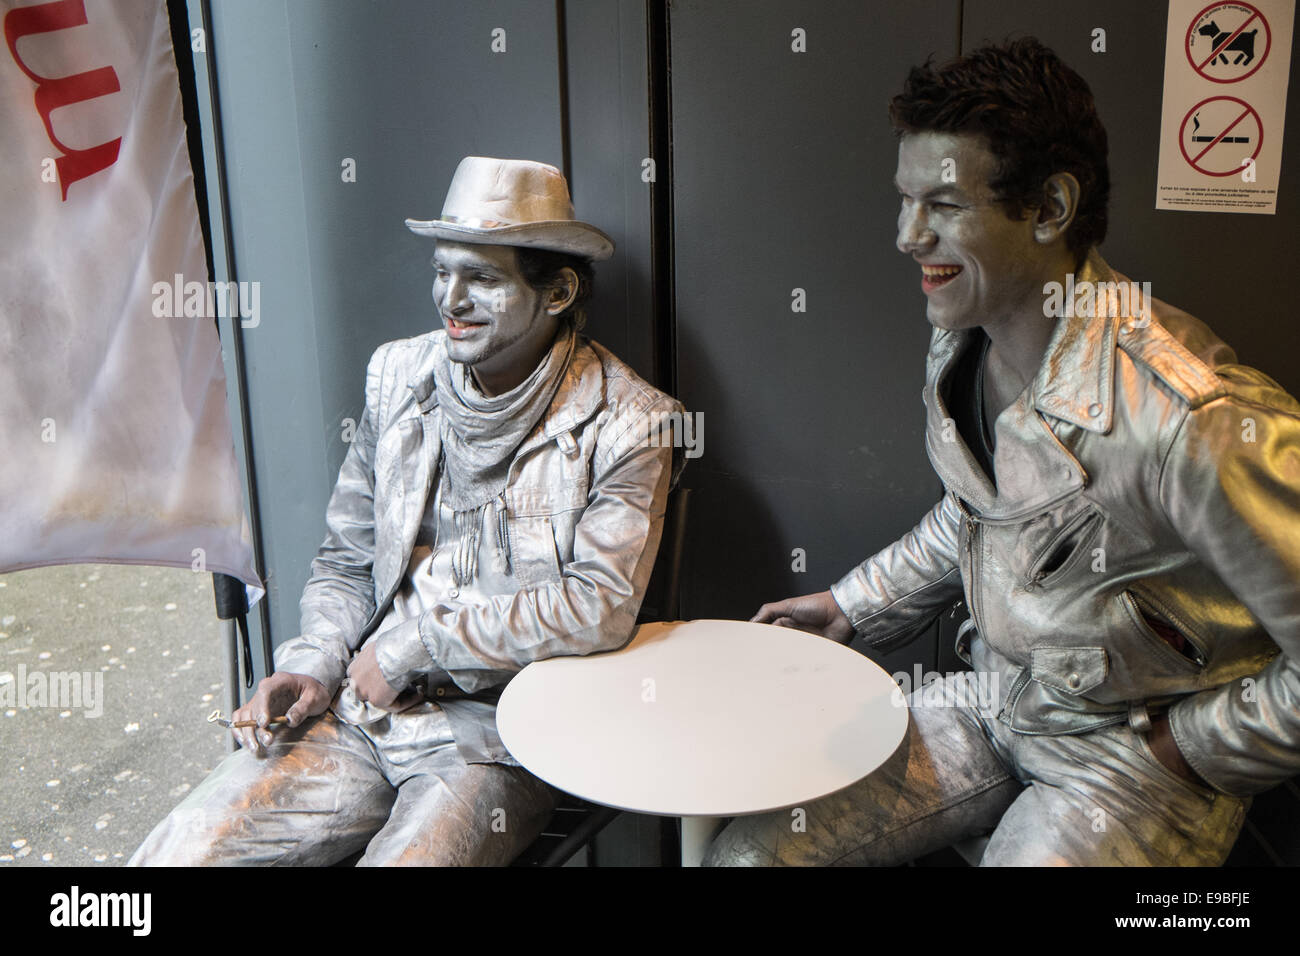 Stand still,motionless, street artists / performers having a rest and relaxation time taking a break at cafe, coffee shop,Paris. Stock Photo